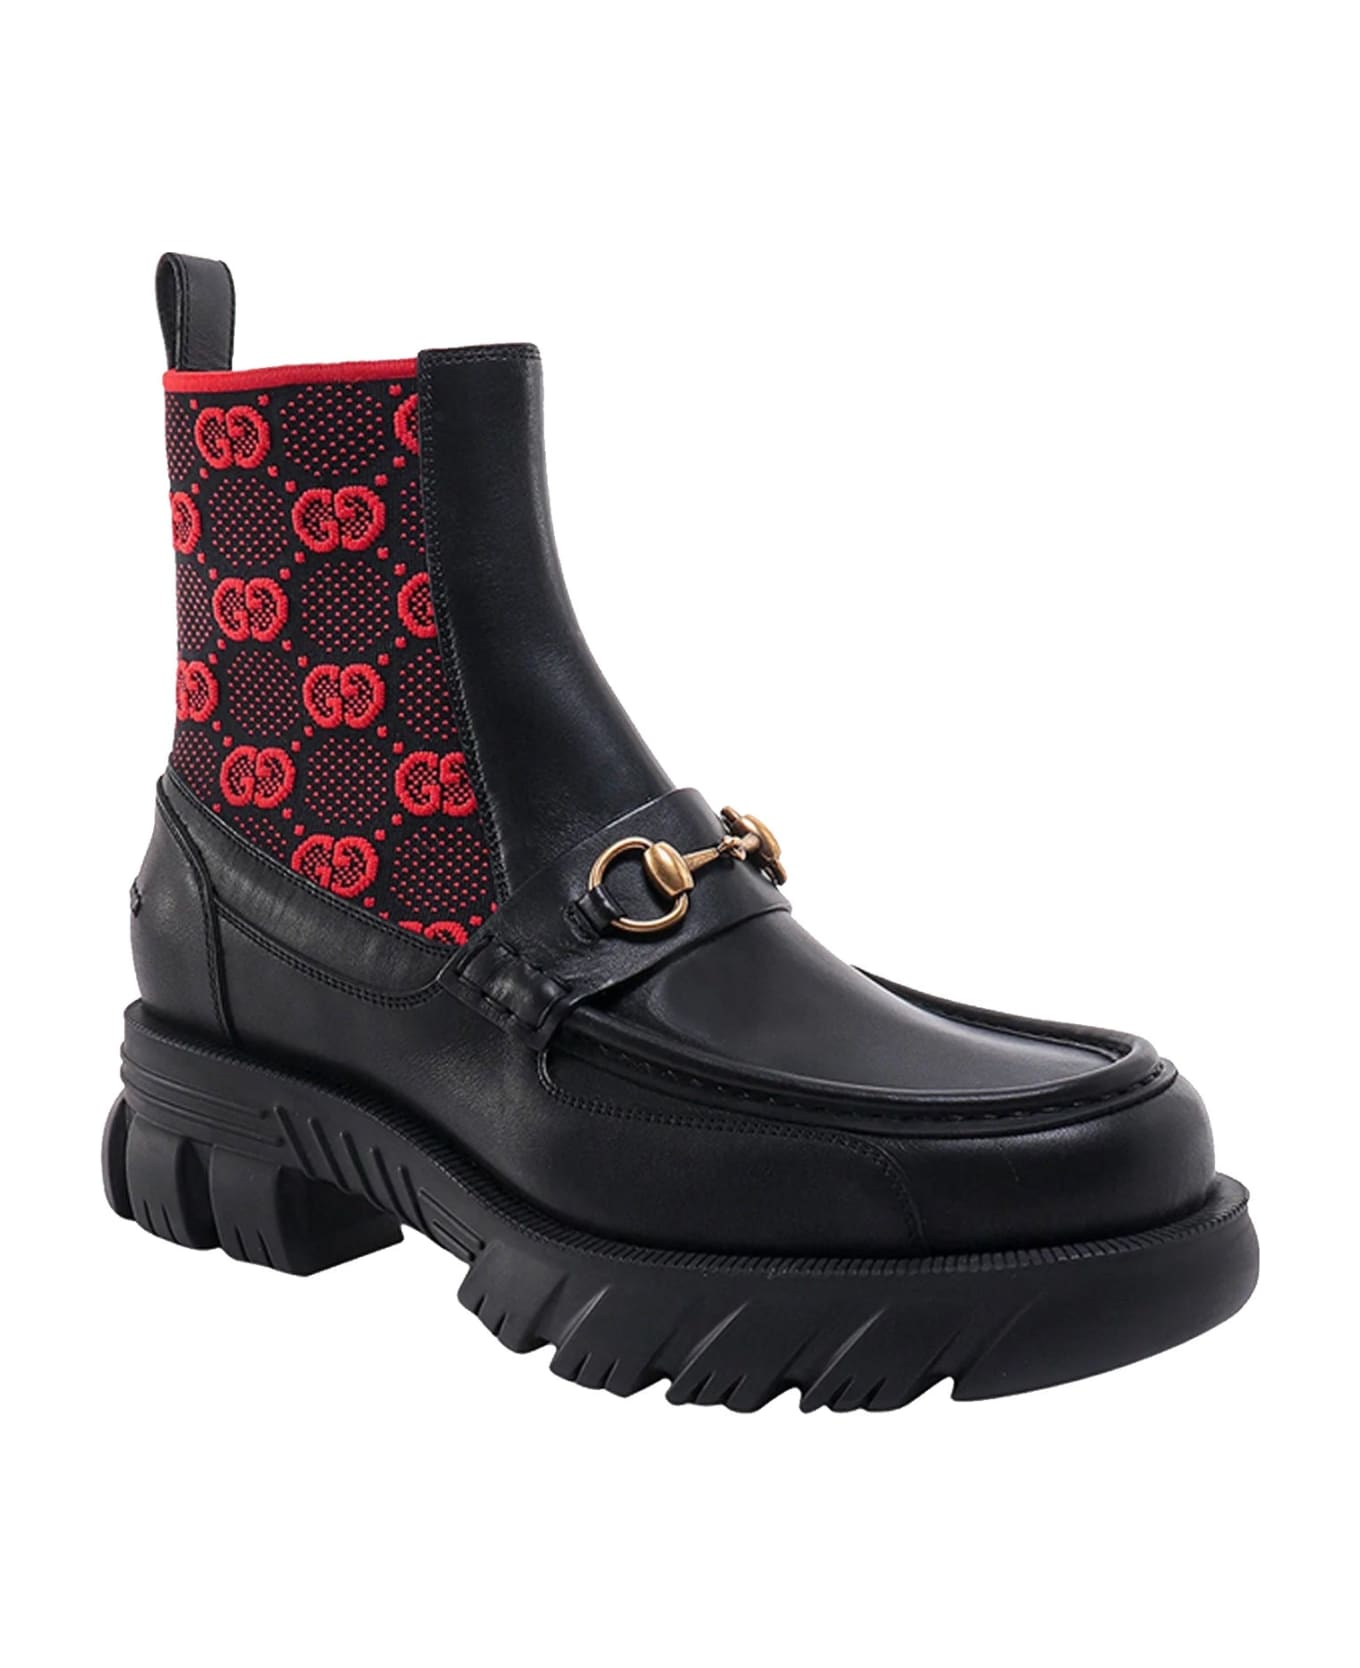 Gucci Gg Leather Boots - Black ブーツ